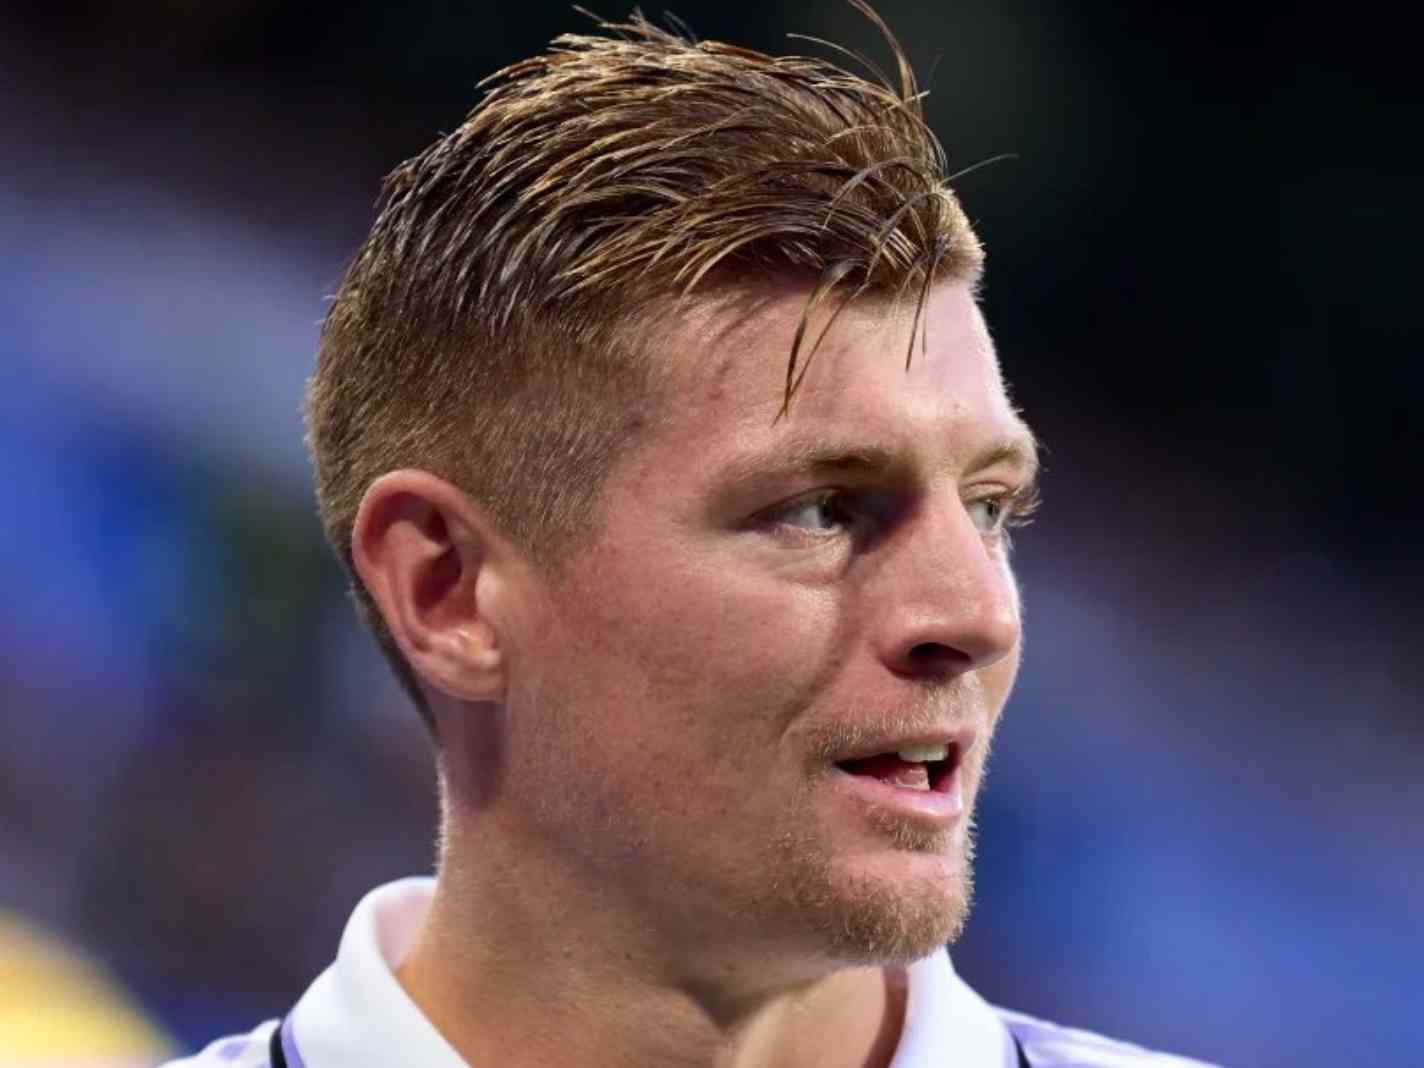 Toni Kroos tells designers what he really thinks of collared kits